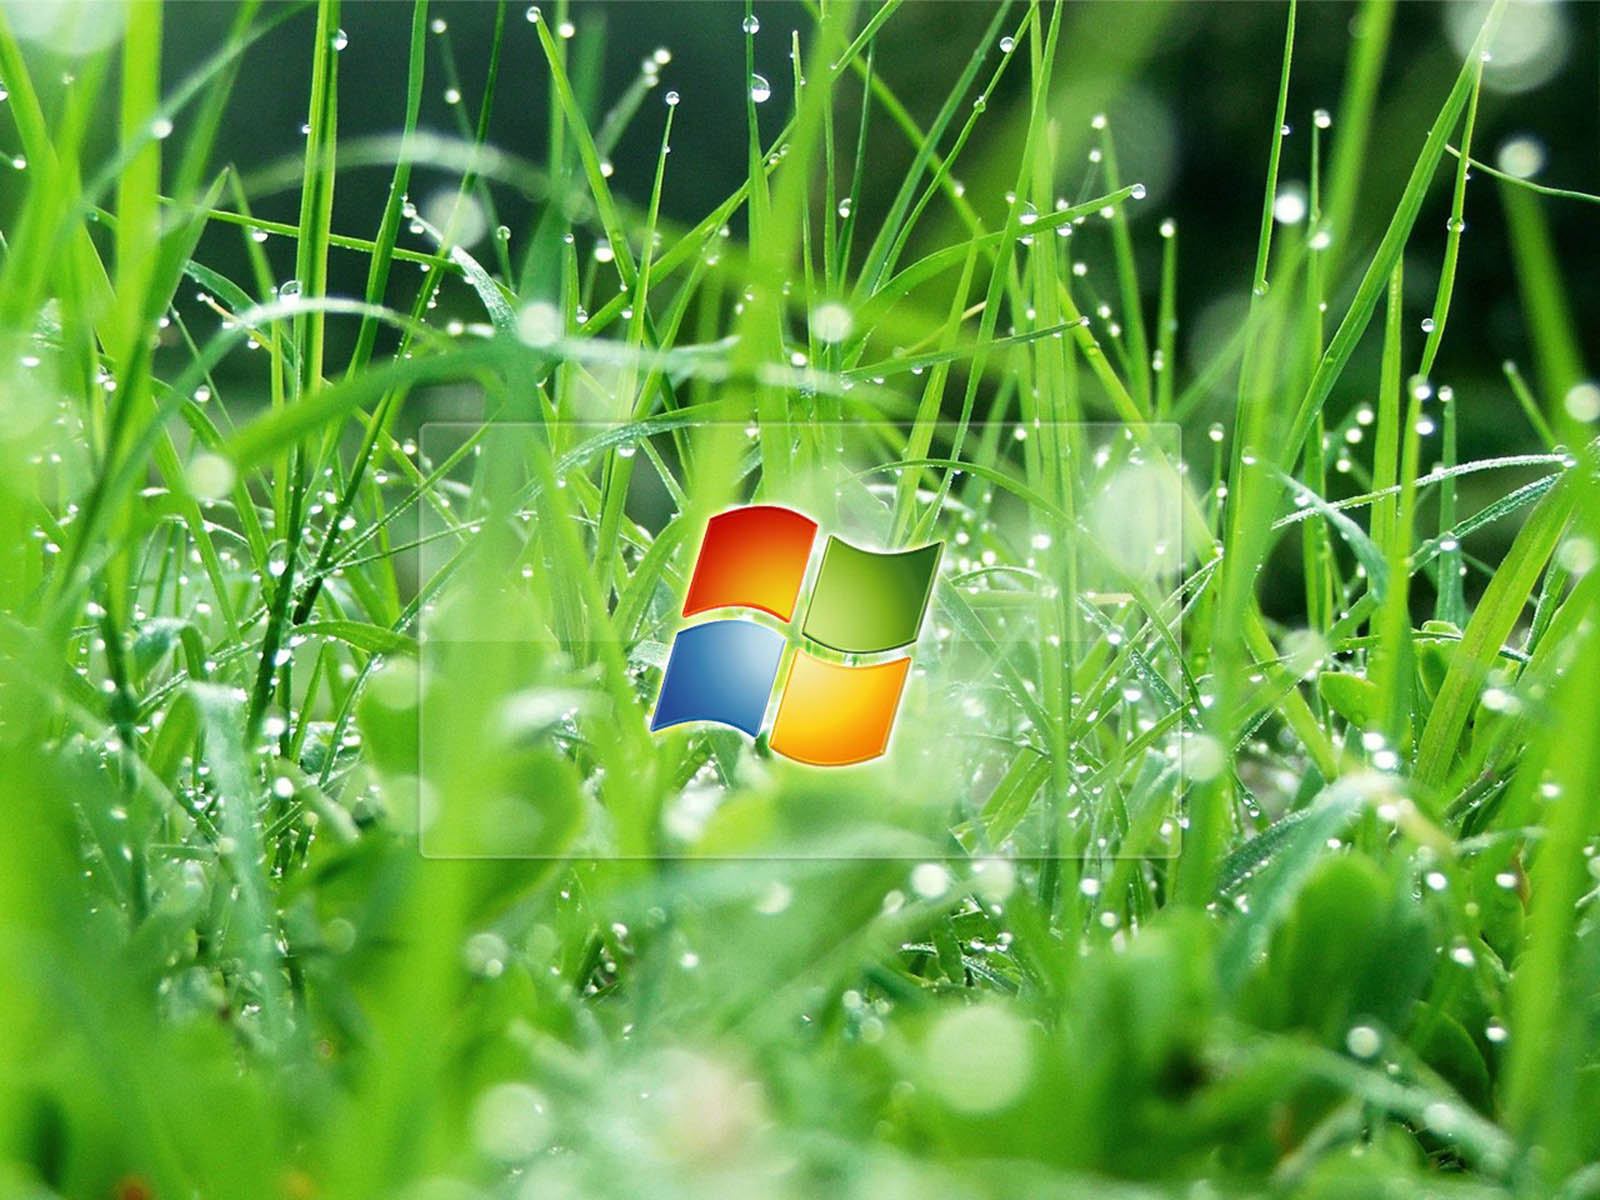 wallpaper: Windows XP Wallpapers And Backgrounds